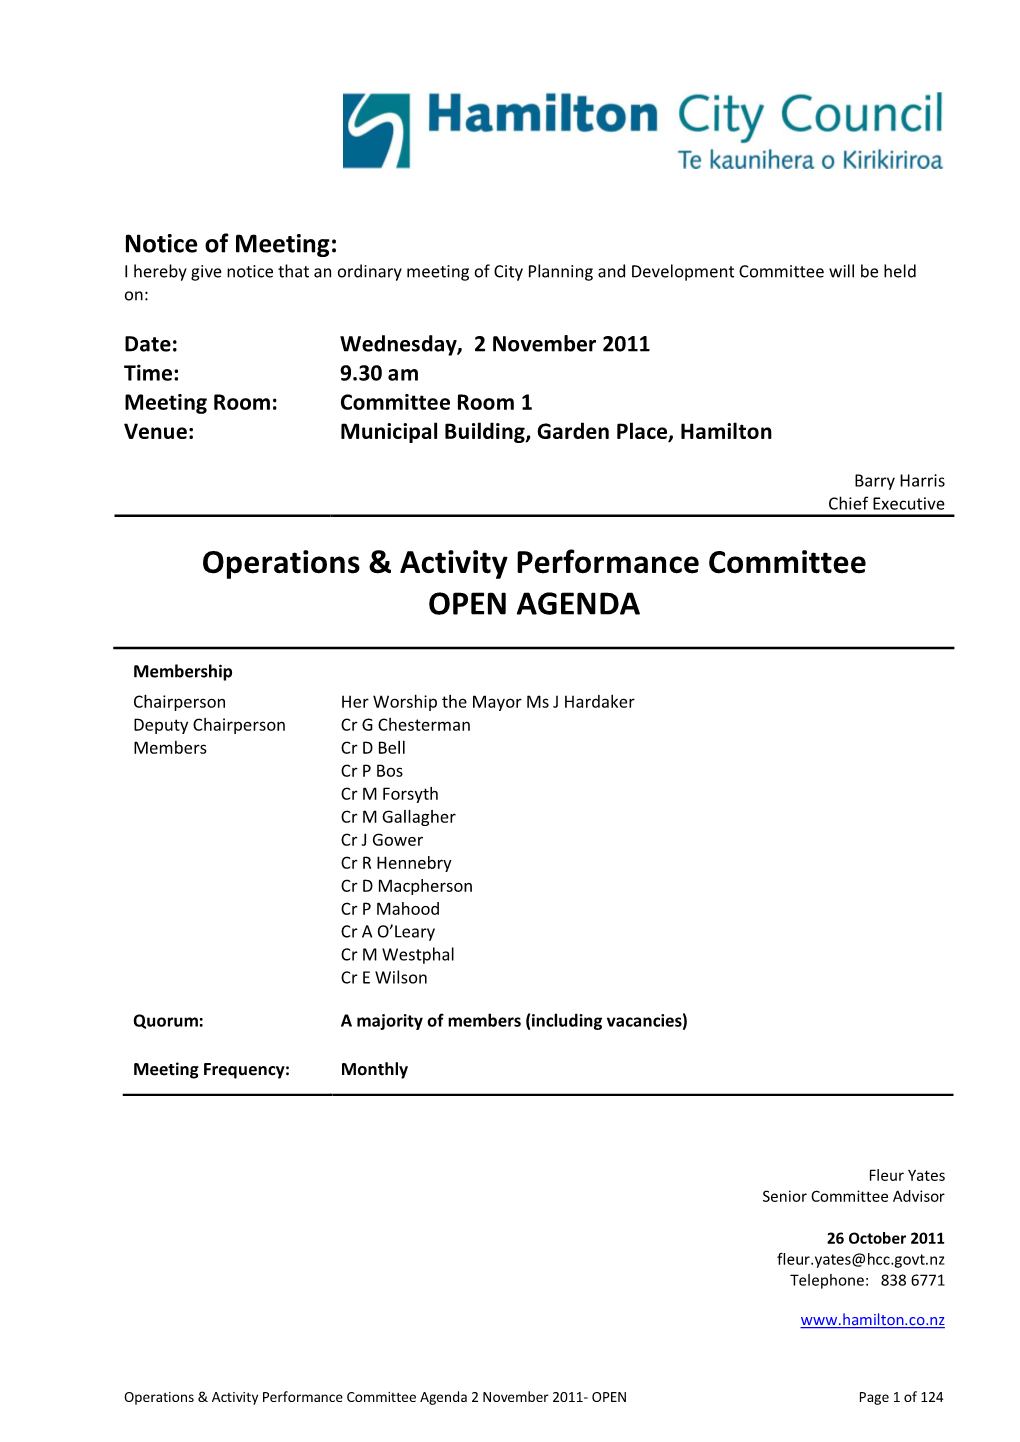 2 November 2011 Time: 9.30 Am Meeting Room: Committee Room 1 Venue: Municipal Building, Garden Place, Hamilton